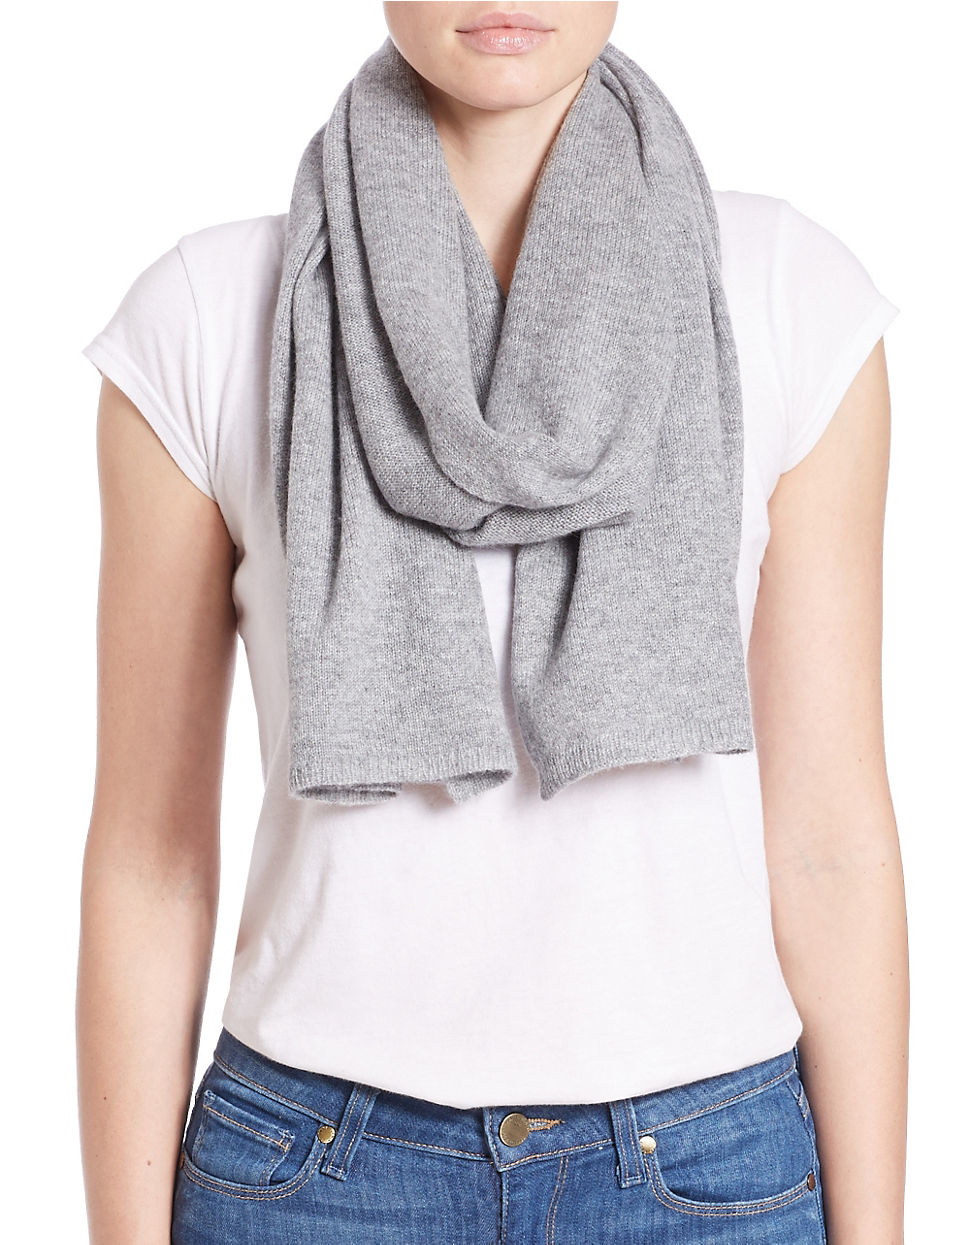 Lord & taylor Cashmere Scarf in Gray | Lyst